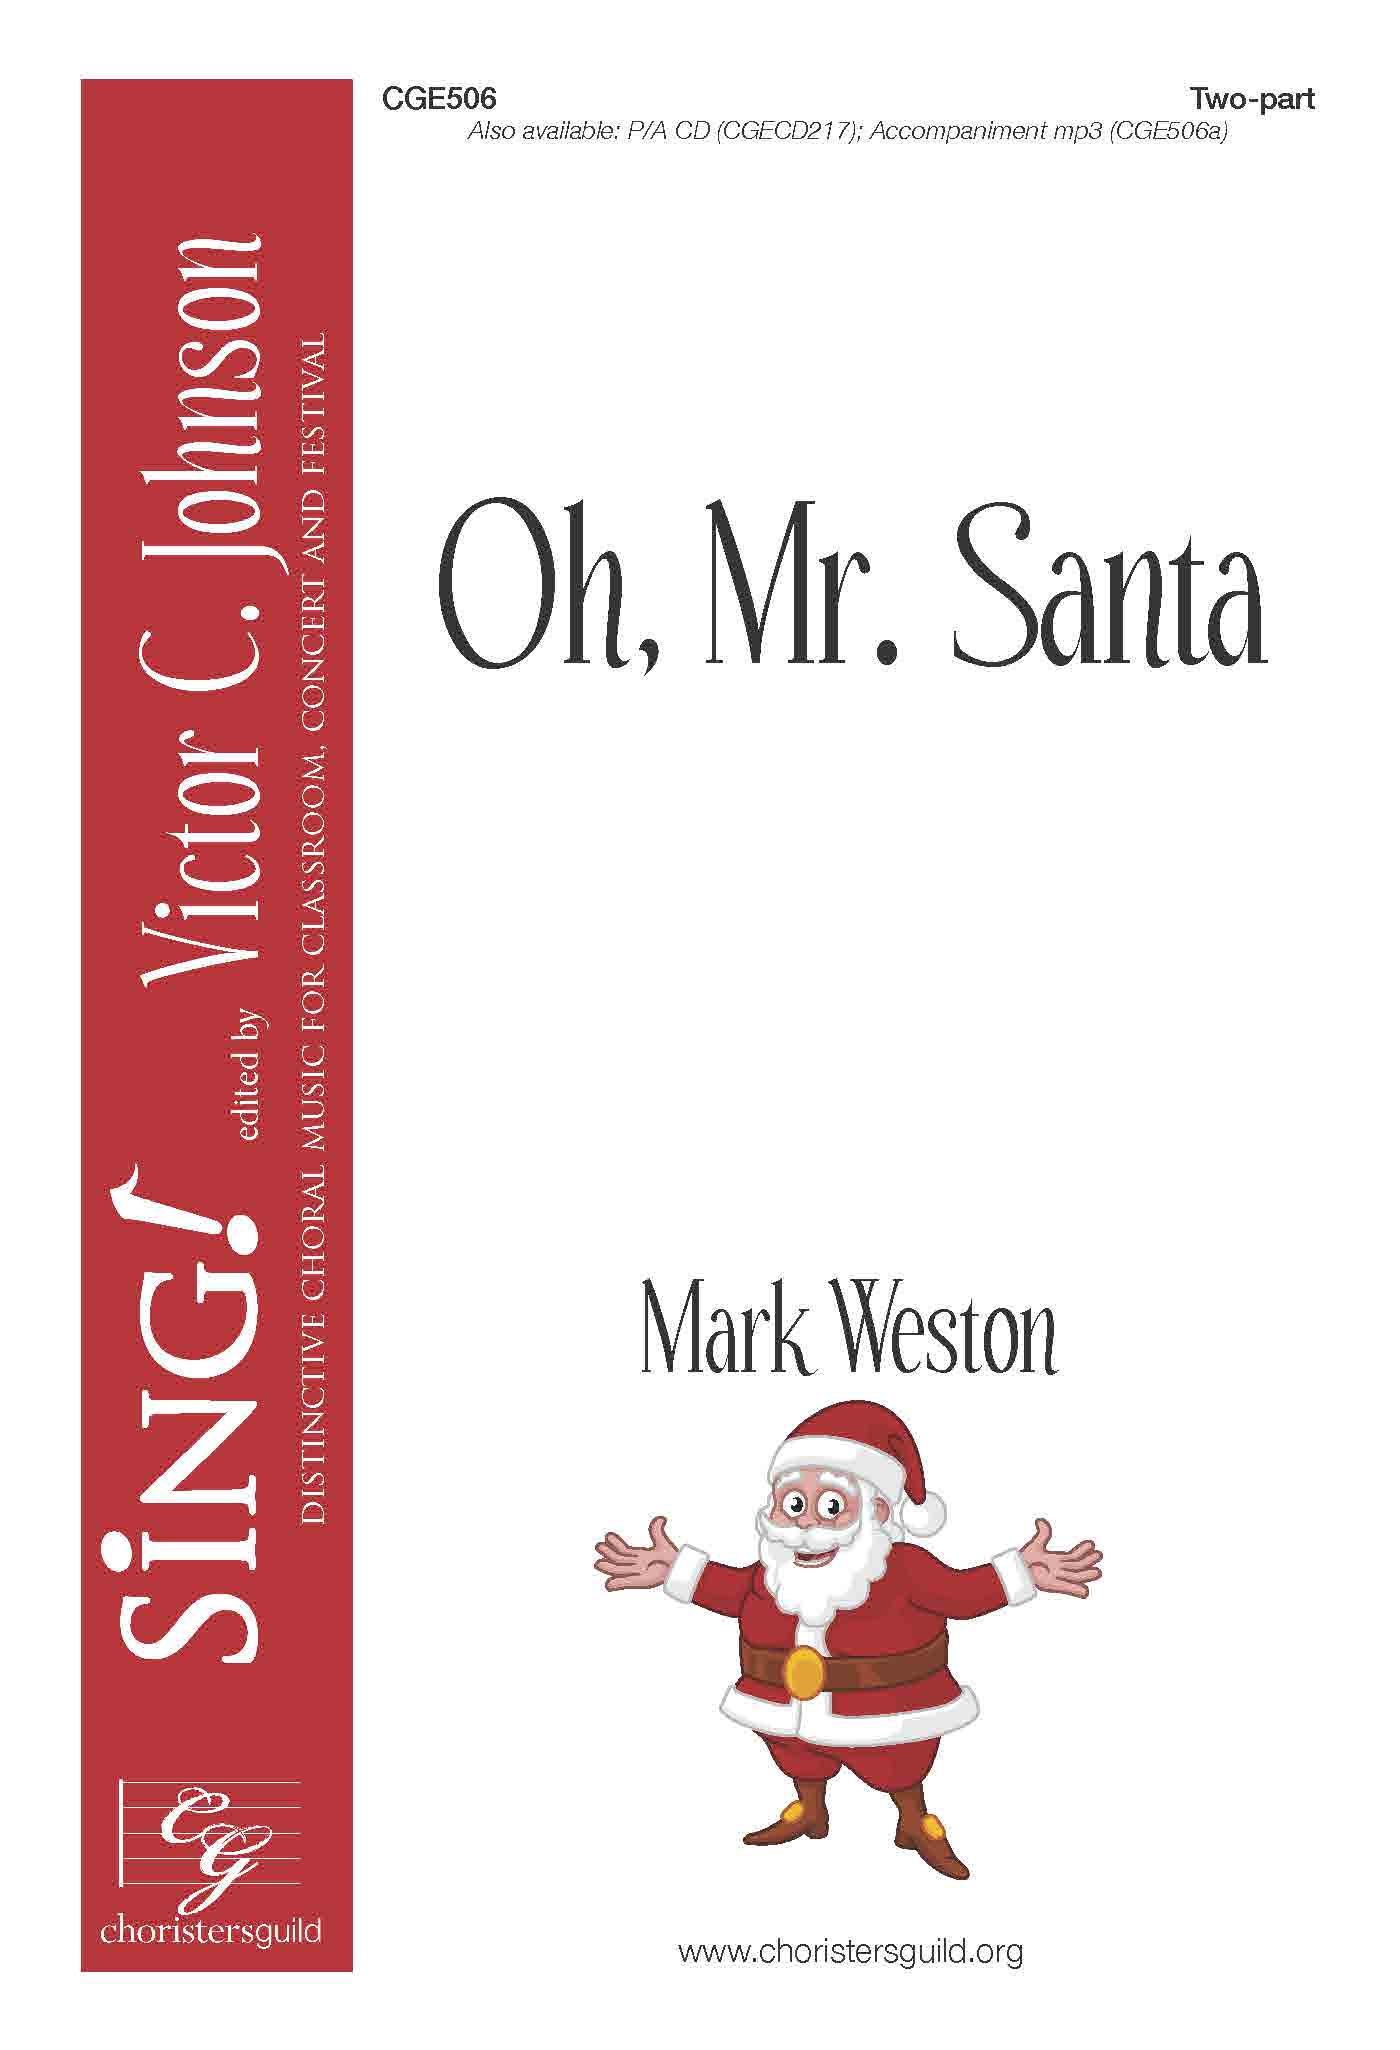 Oh, Mister Santa - Two-part